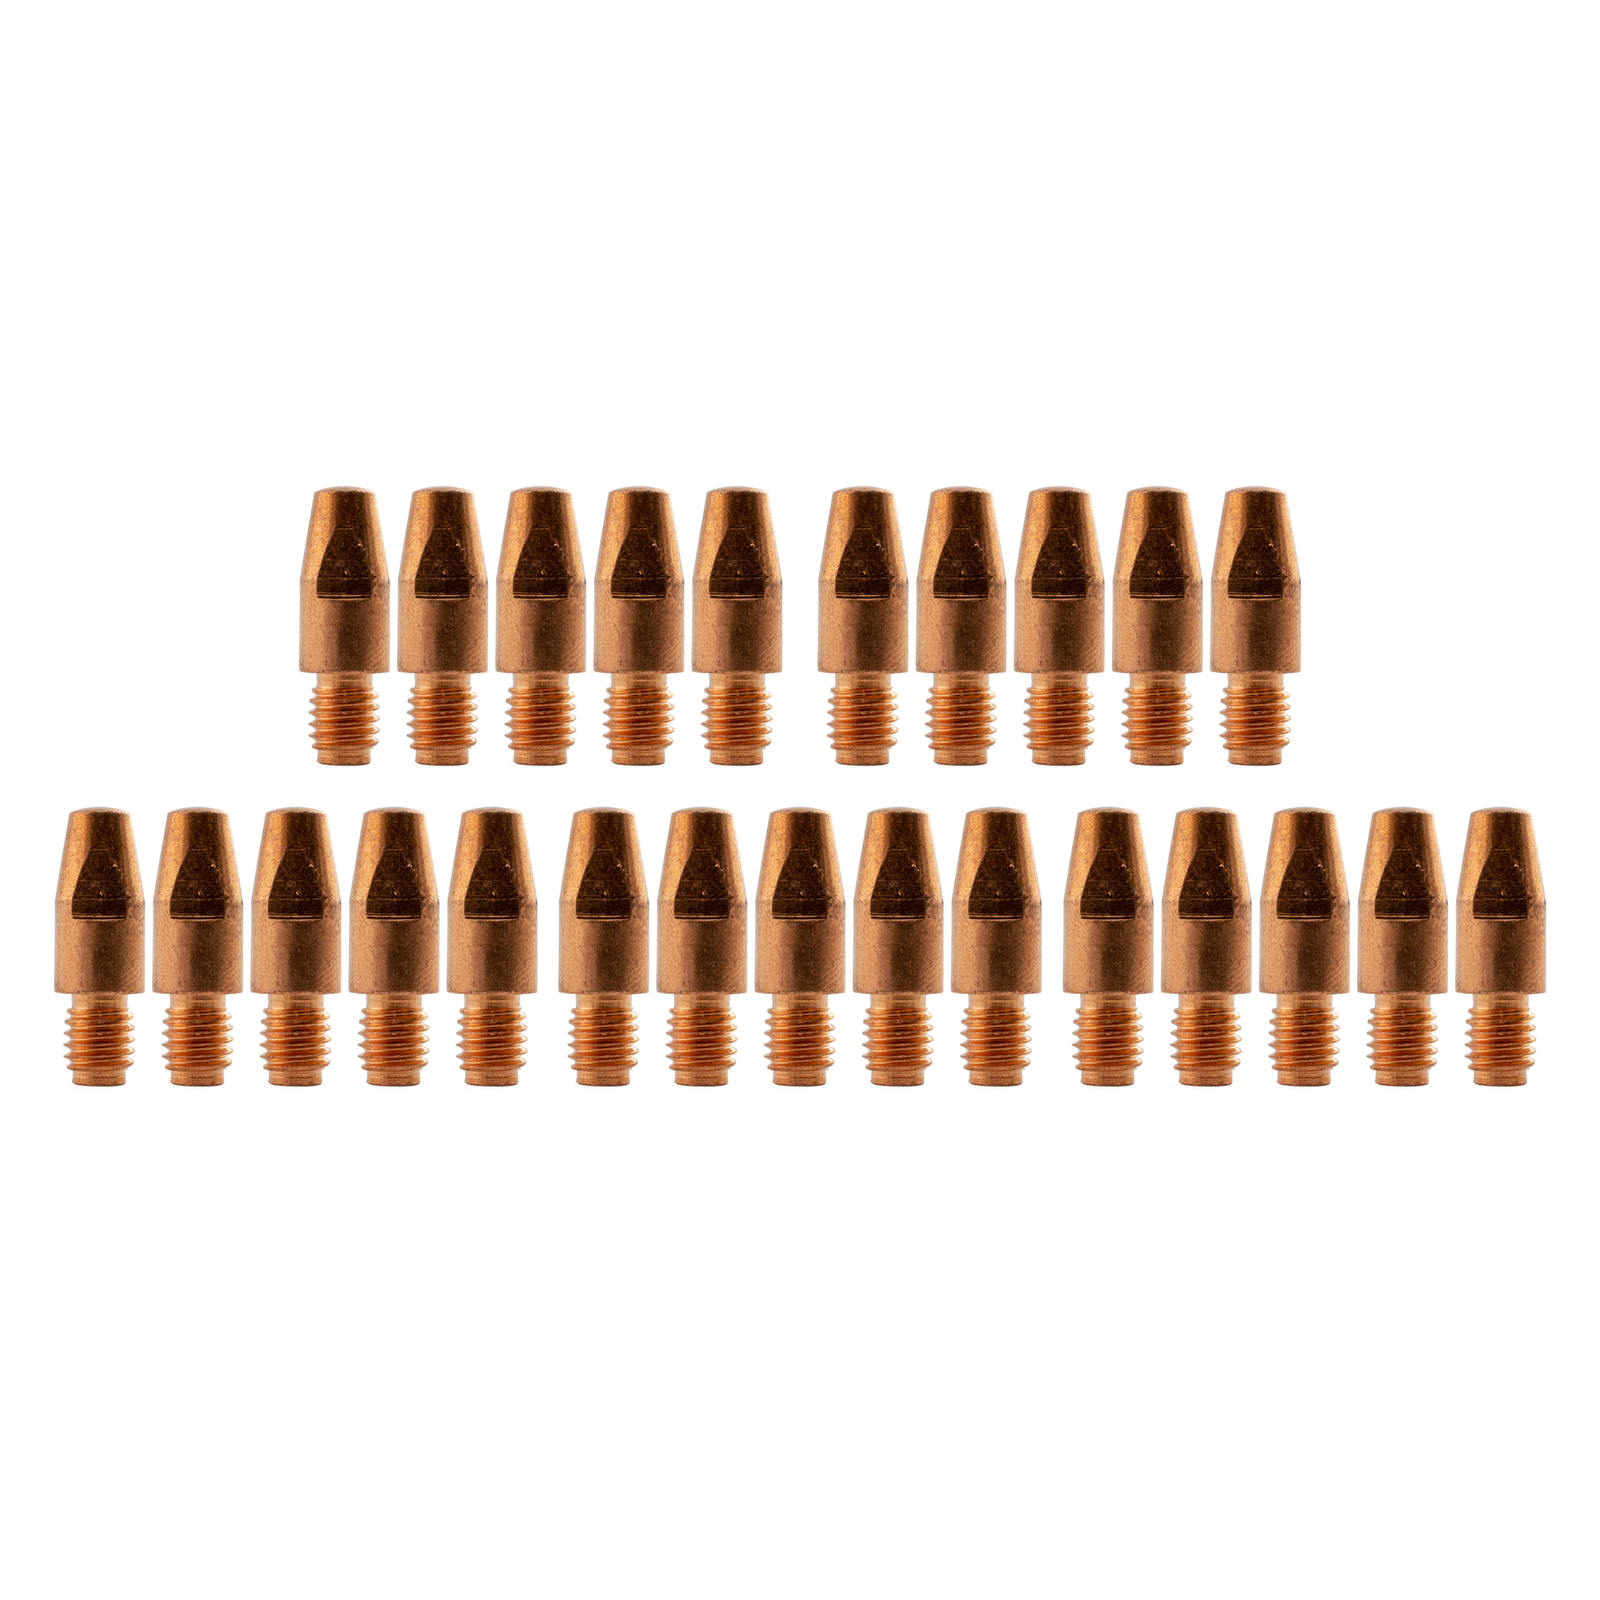 Binzel Style MIG Contact Tips - 0.9mm - 25 pack - M8 x 10mm x 0.9mm